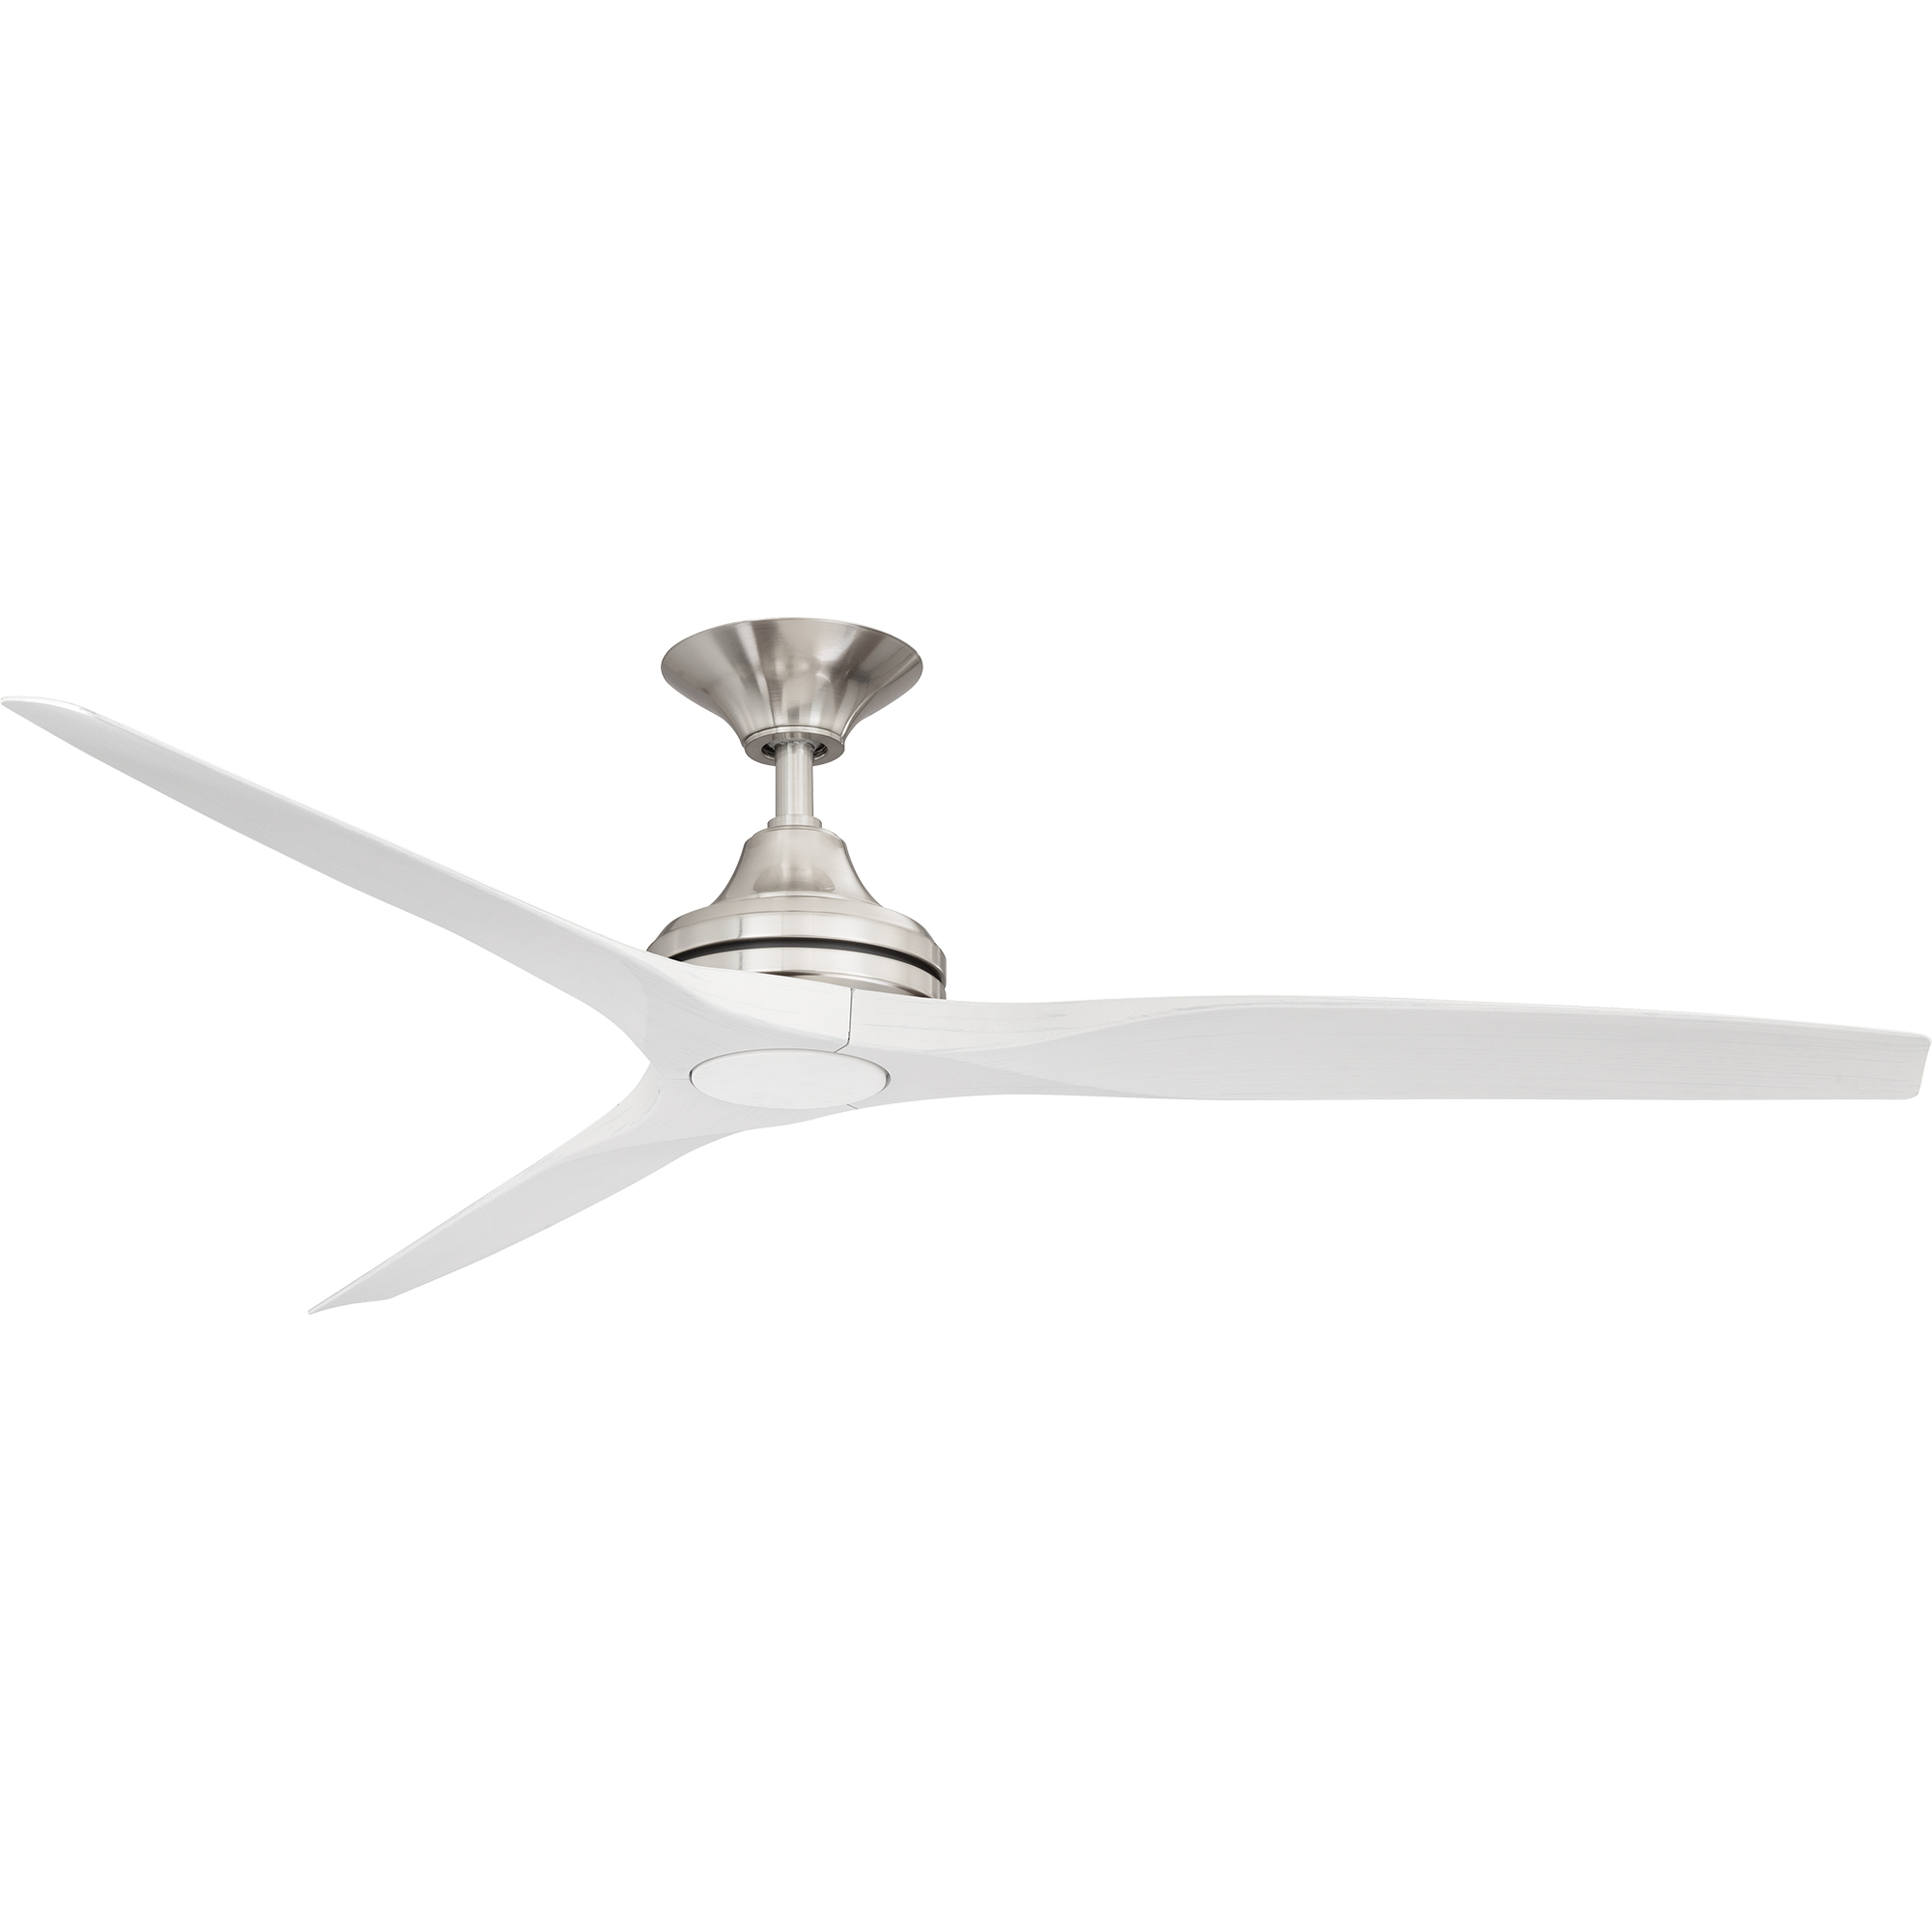 60" Spitfire ceiling fan in Brushed Nickel with White Wash polymer blades